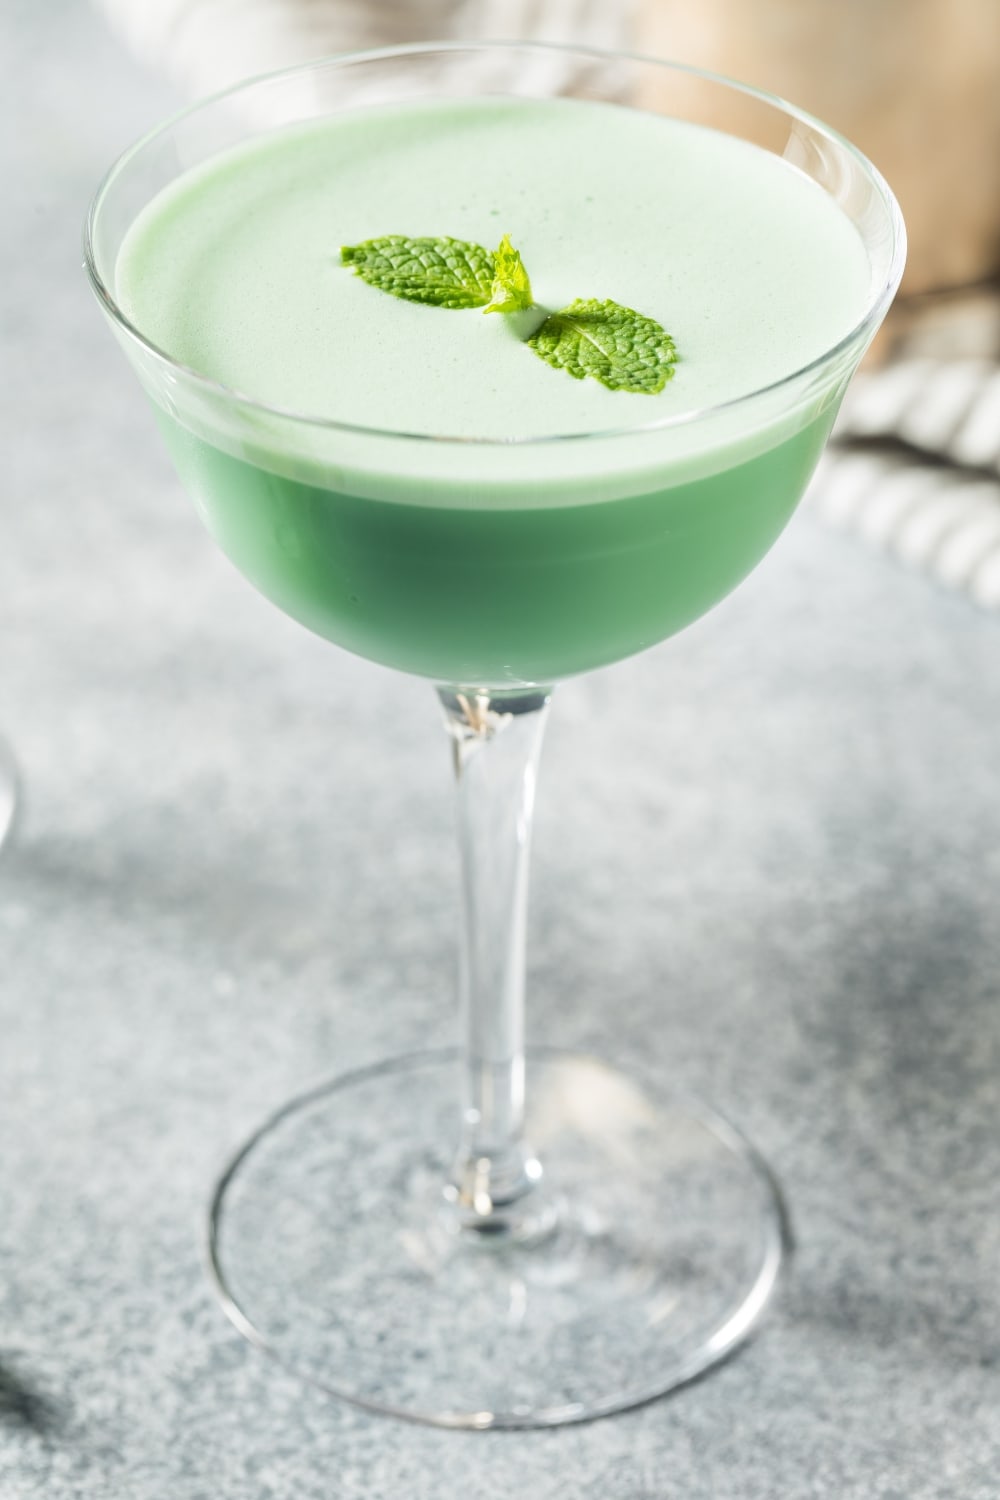 Grasshopper Cocktail on a Glass Garnished With Fresh Mint Leaves